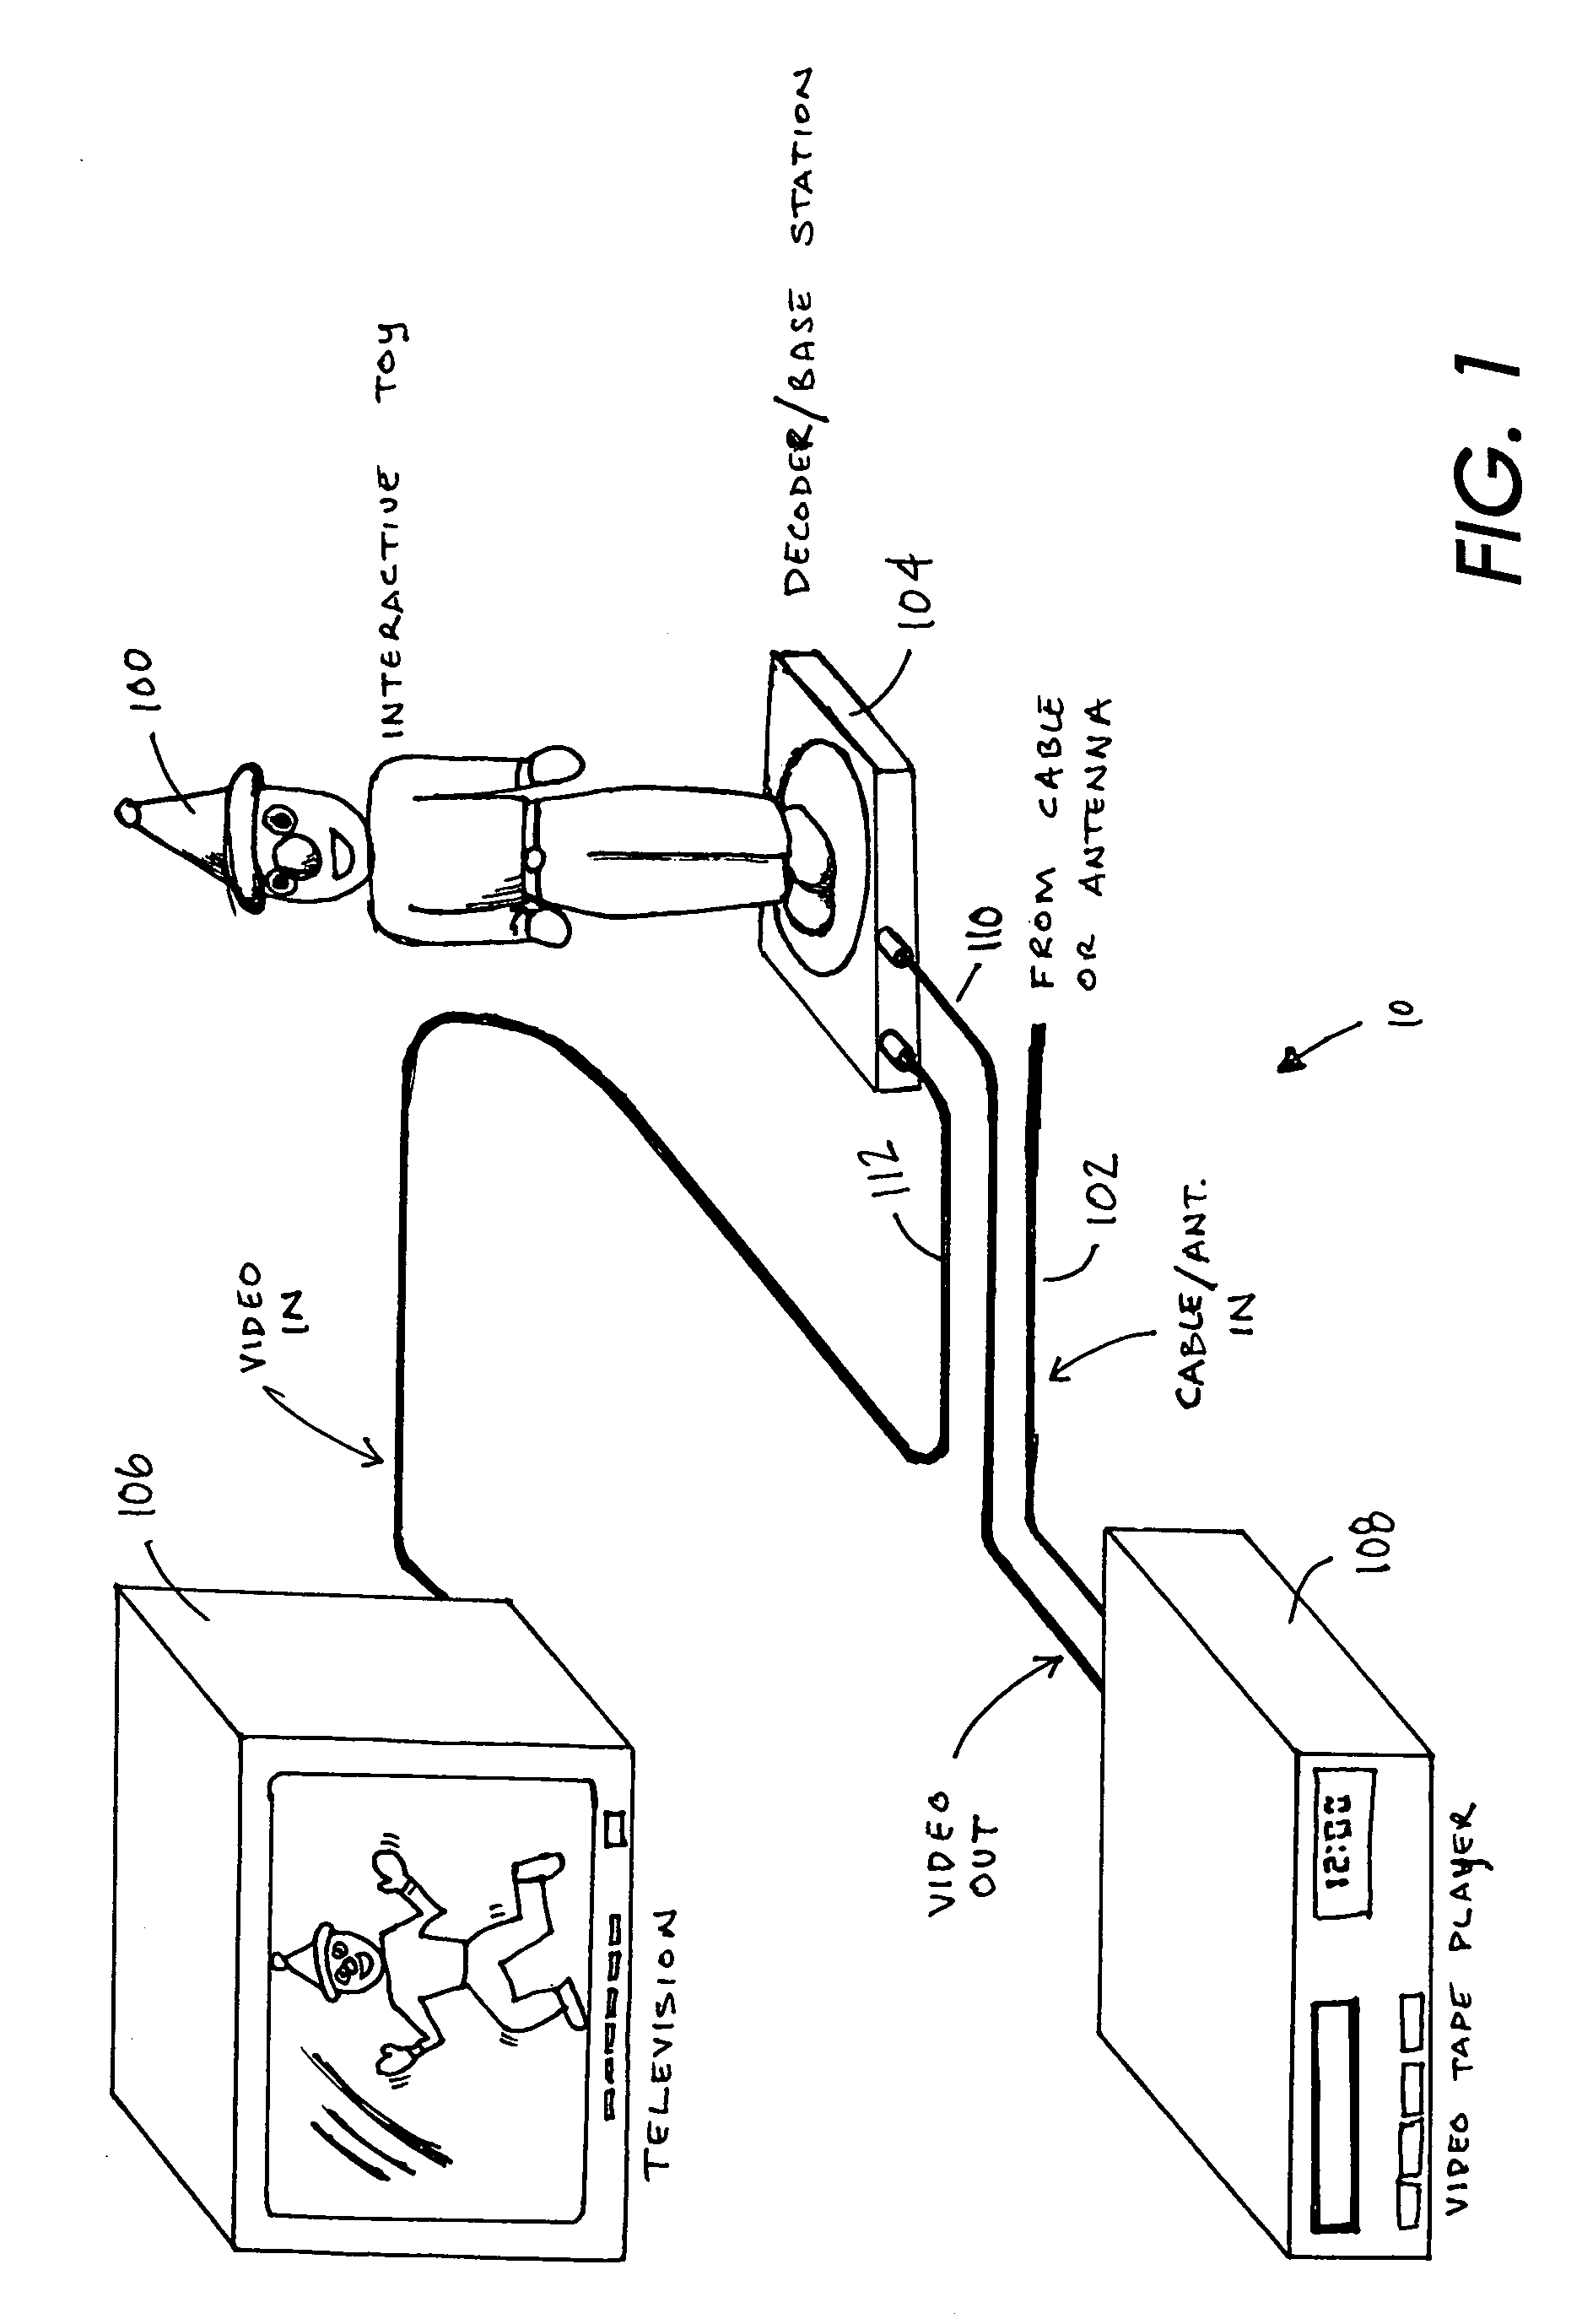 Method and system for downloading and storing interactive device content using the horizontal overscan portion of a video signal